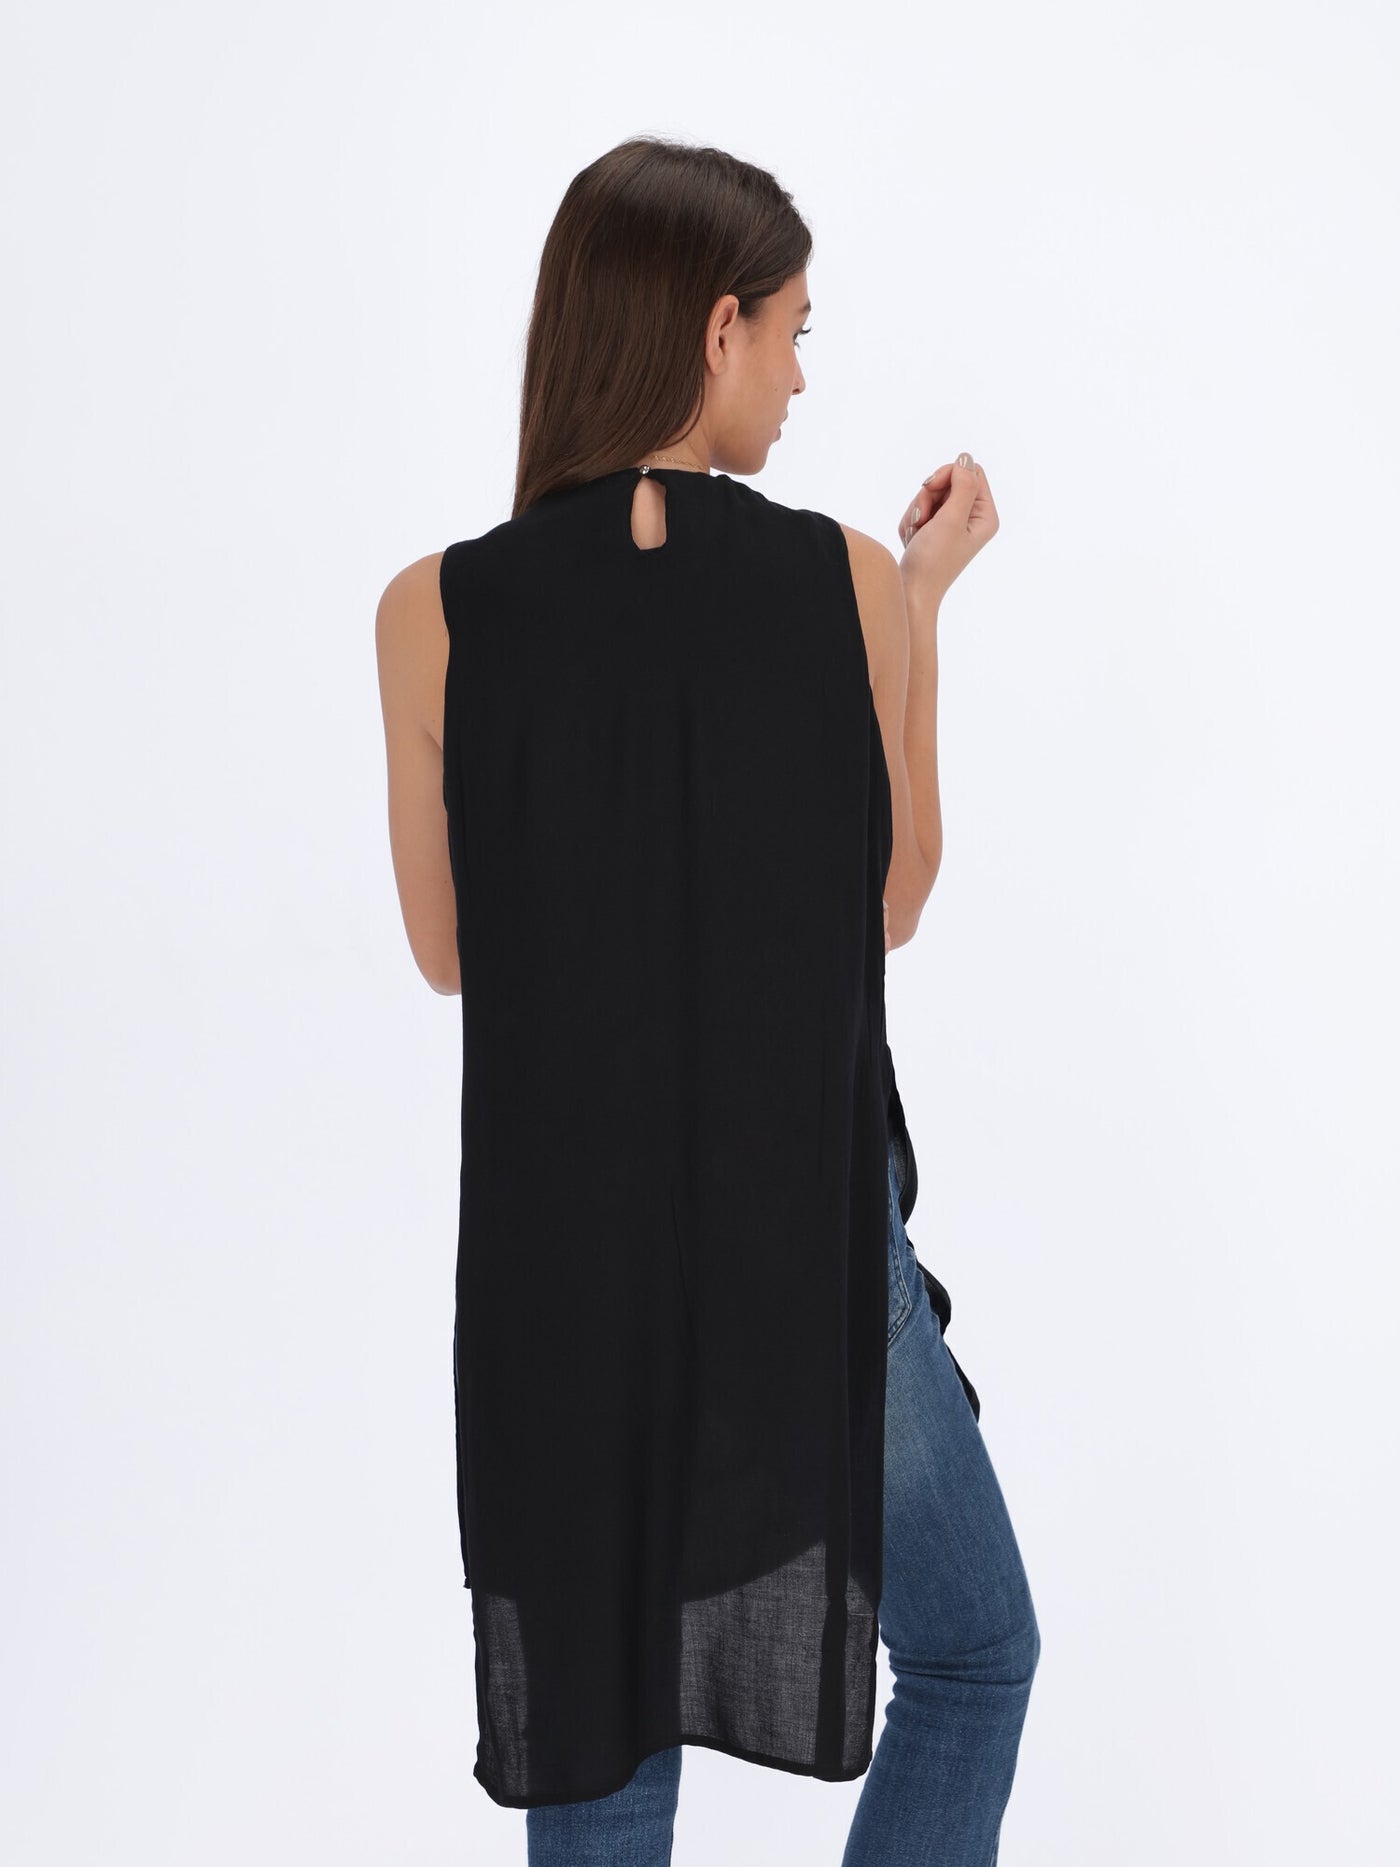 Sleeveless Top with Slit Sides